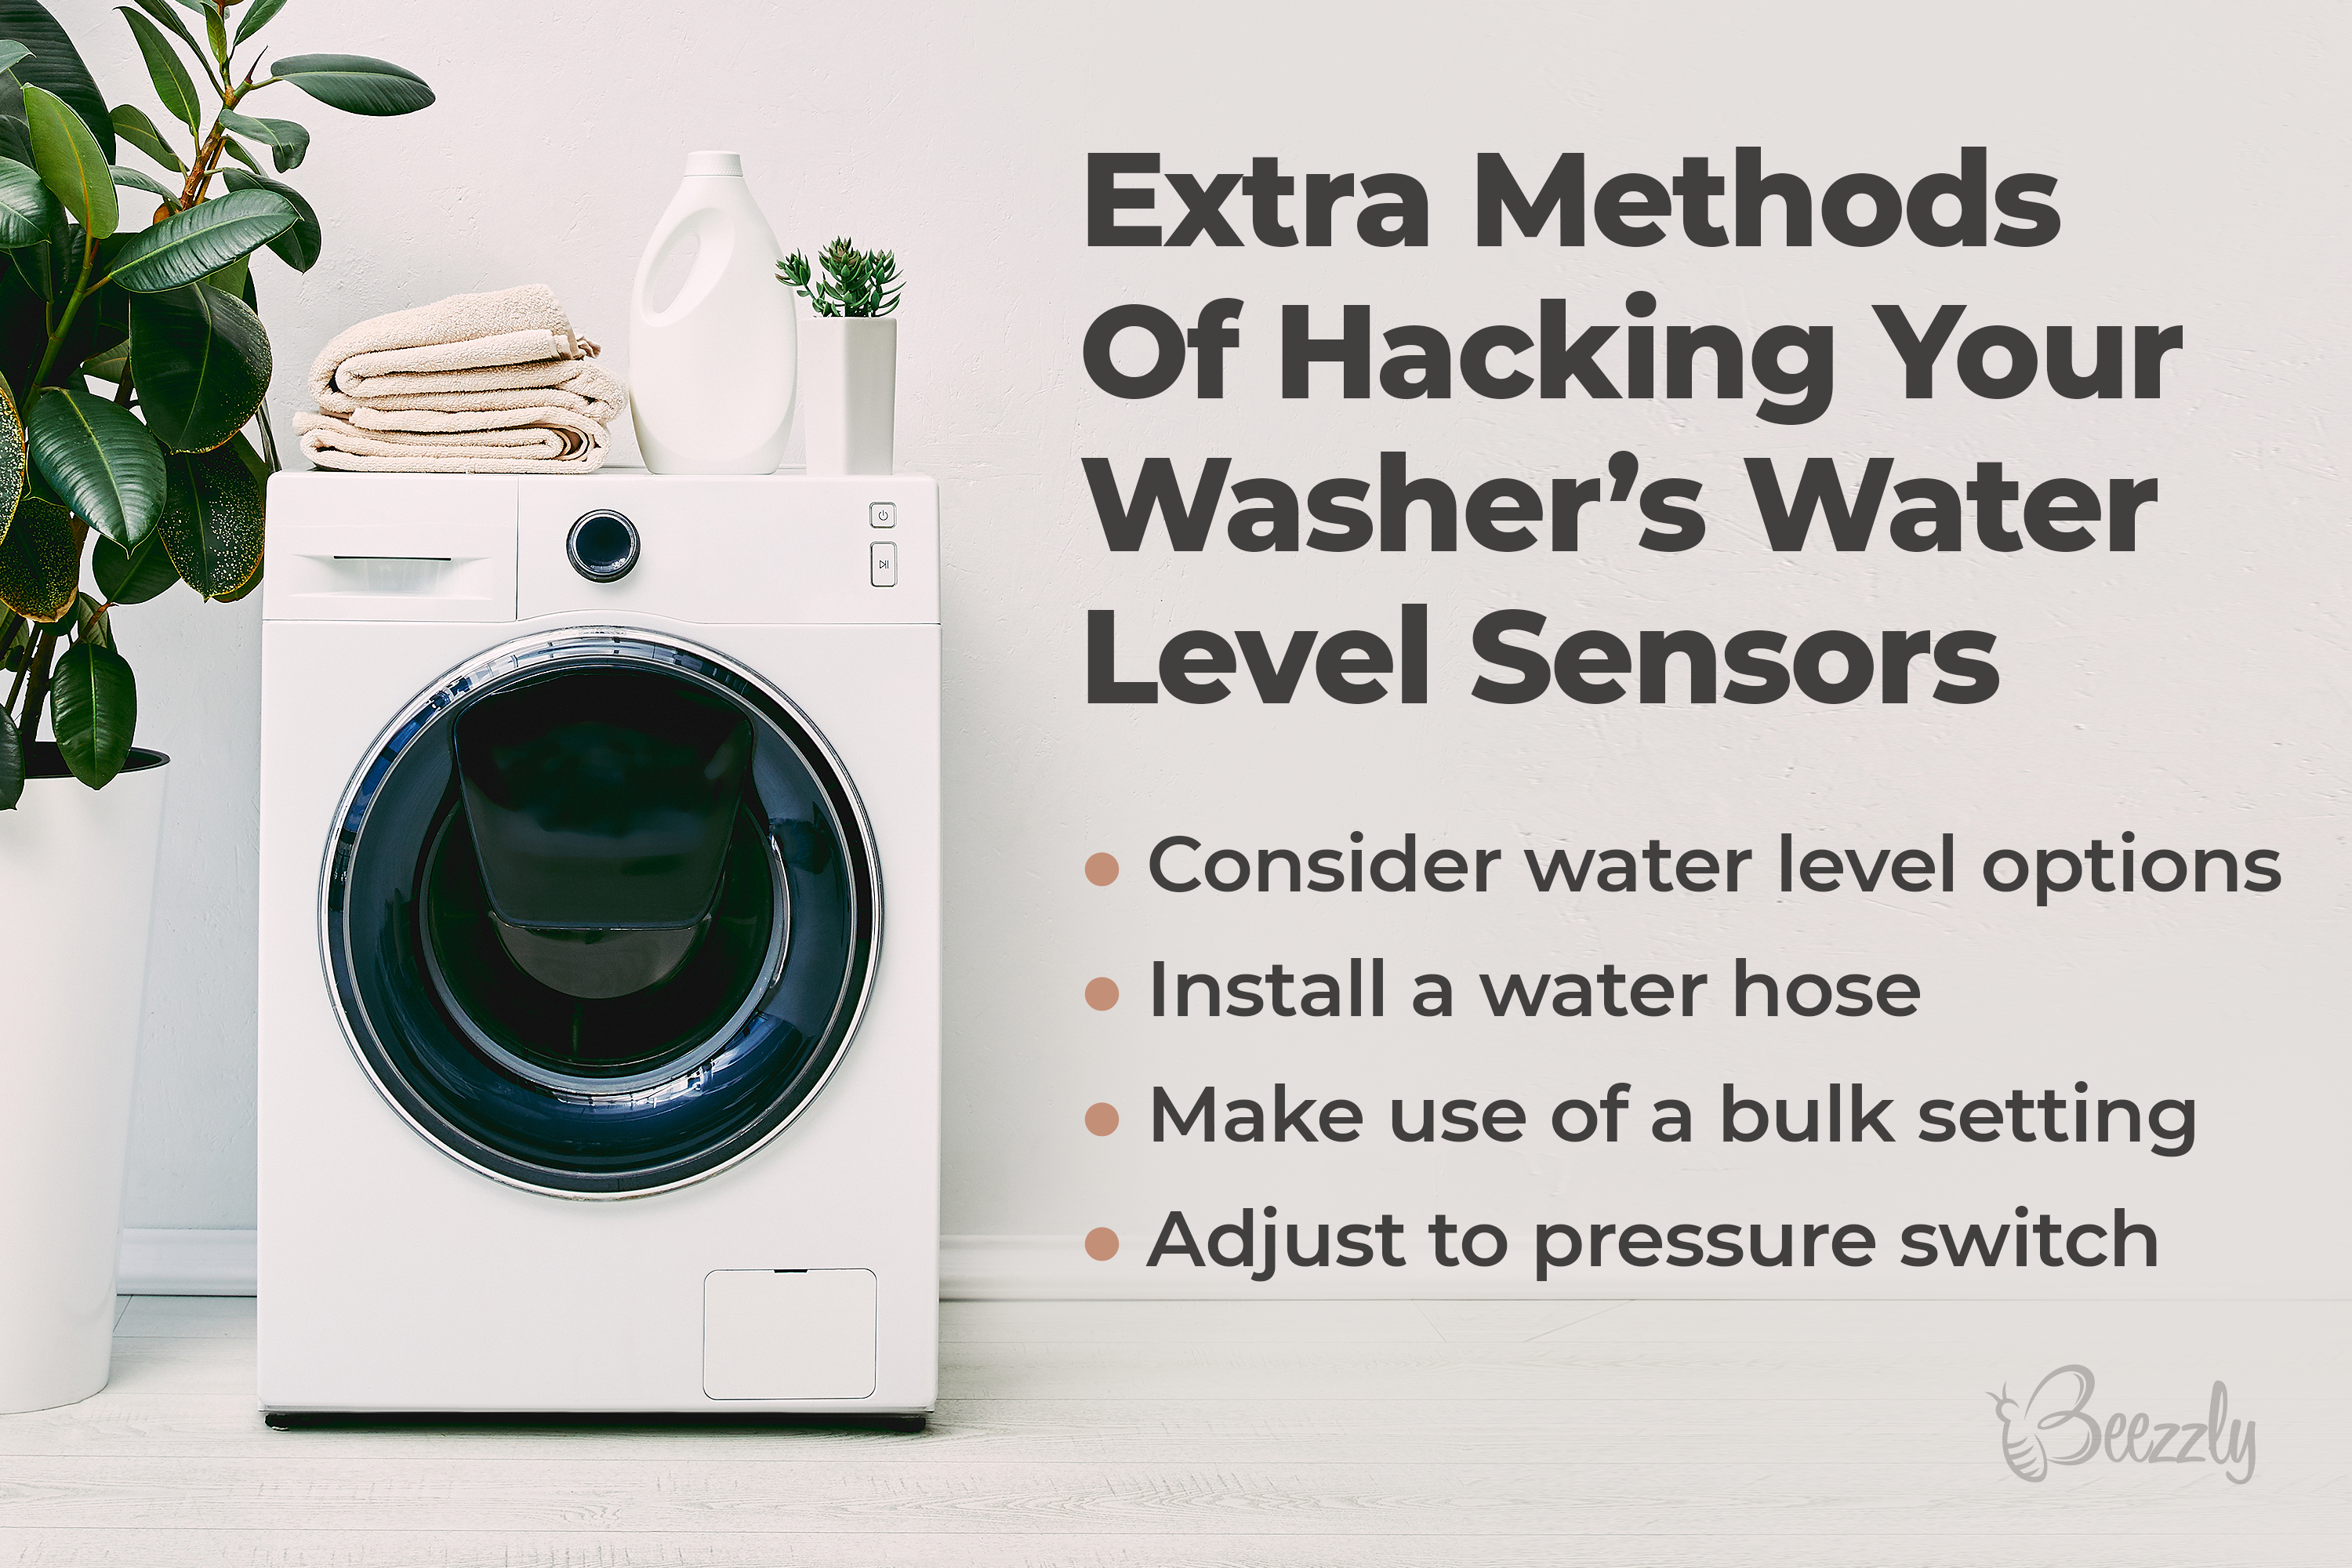 Extra Methods Of Hacking Your Washer’s Water Level Sensors